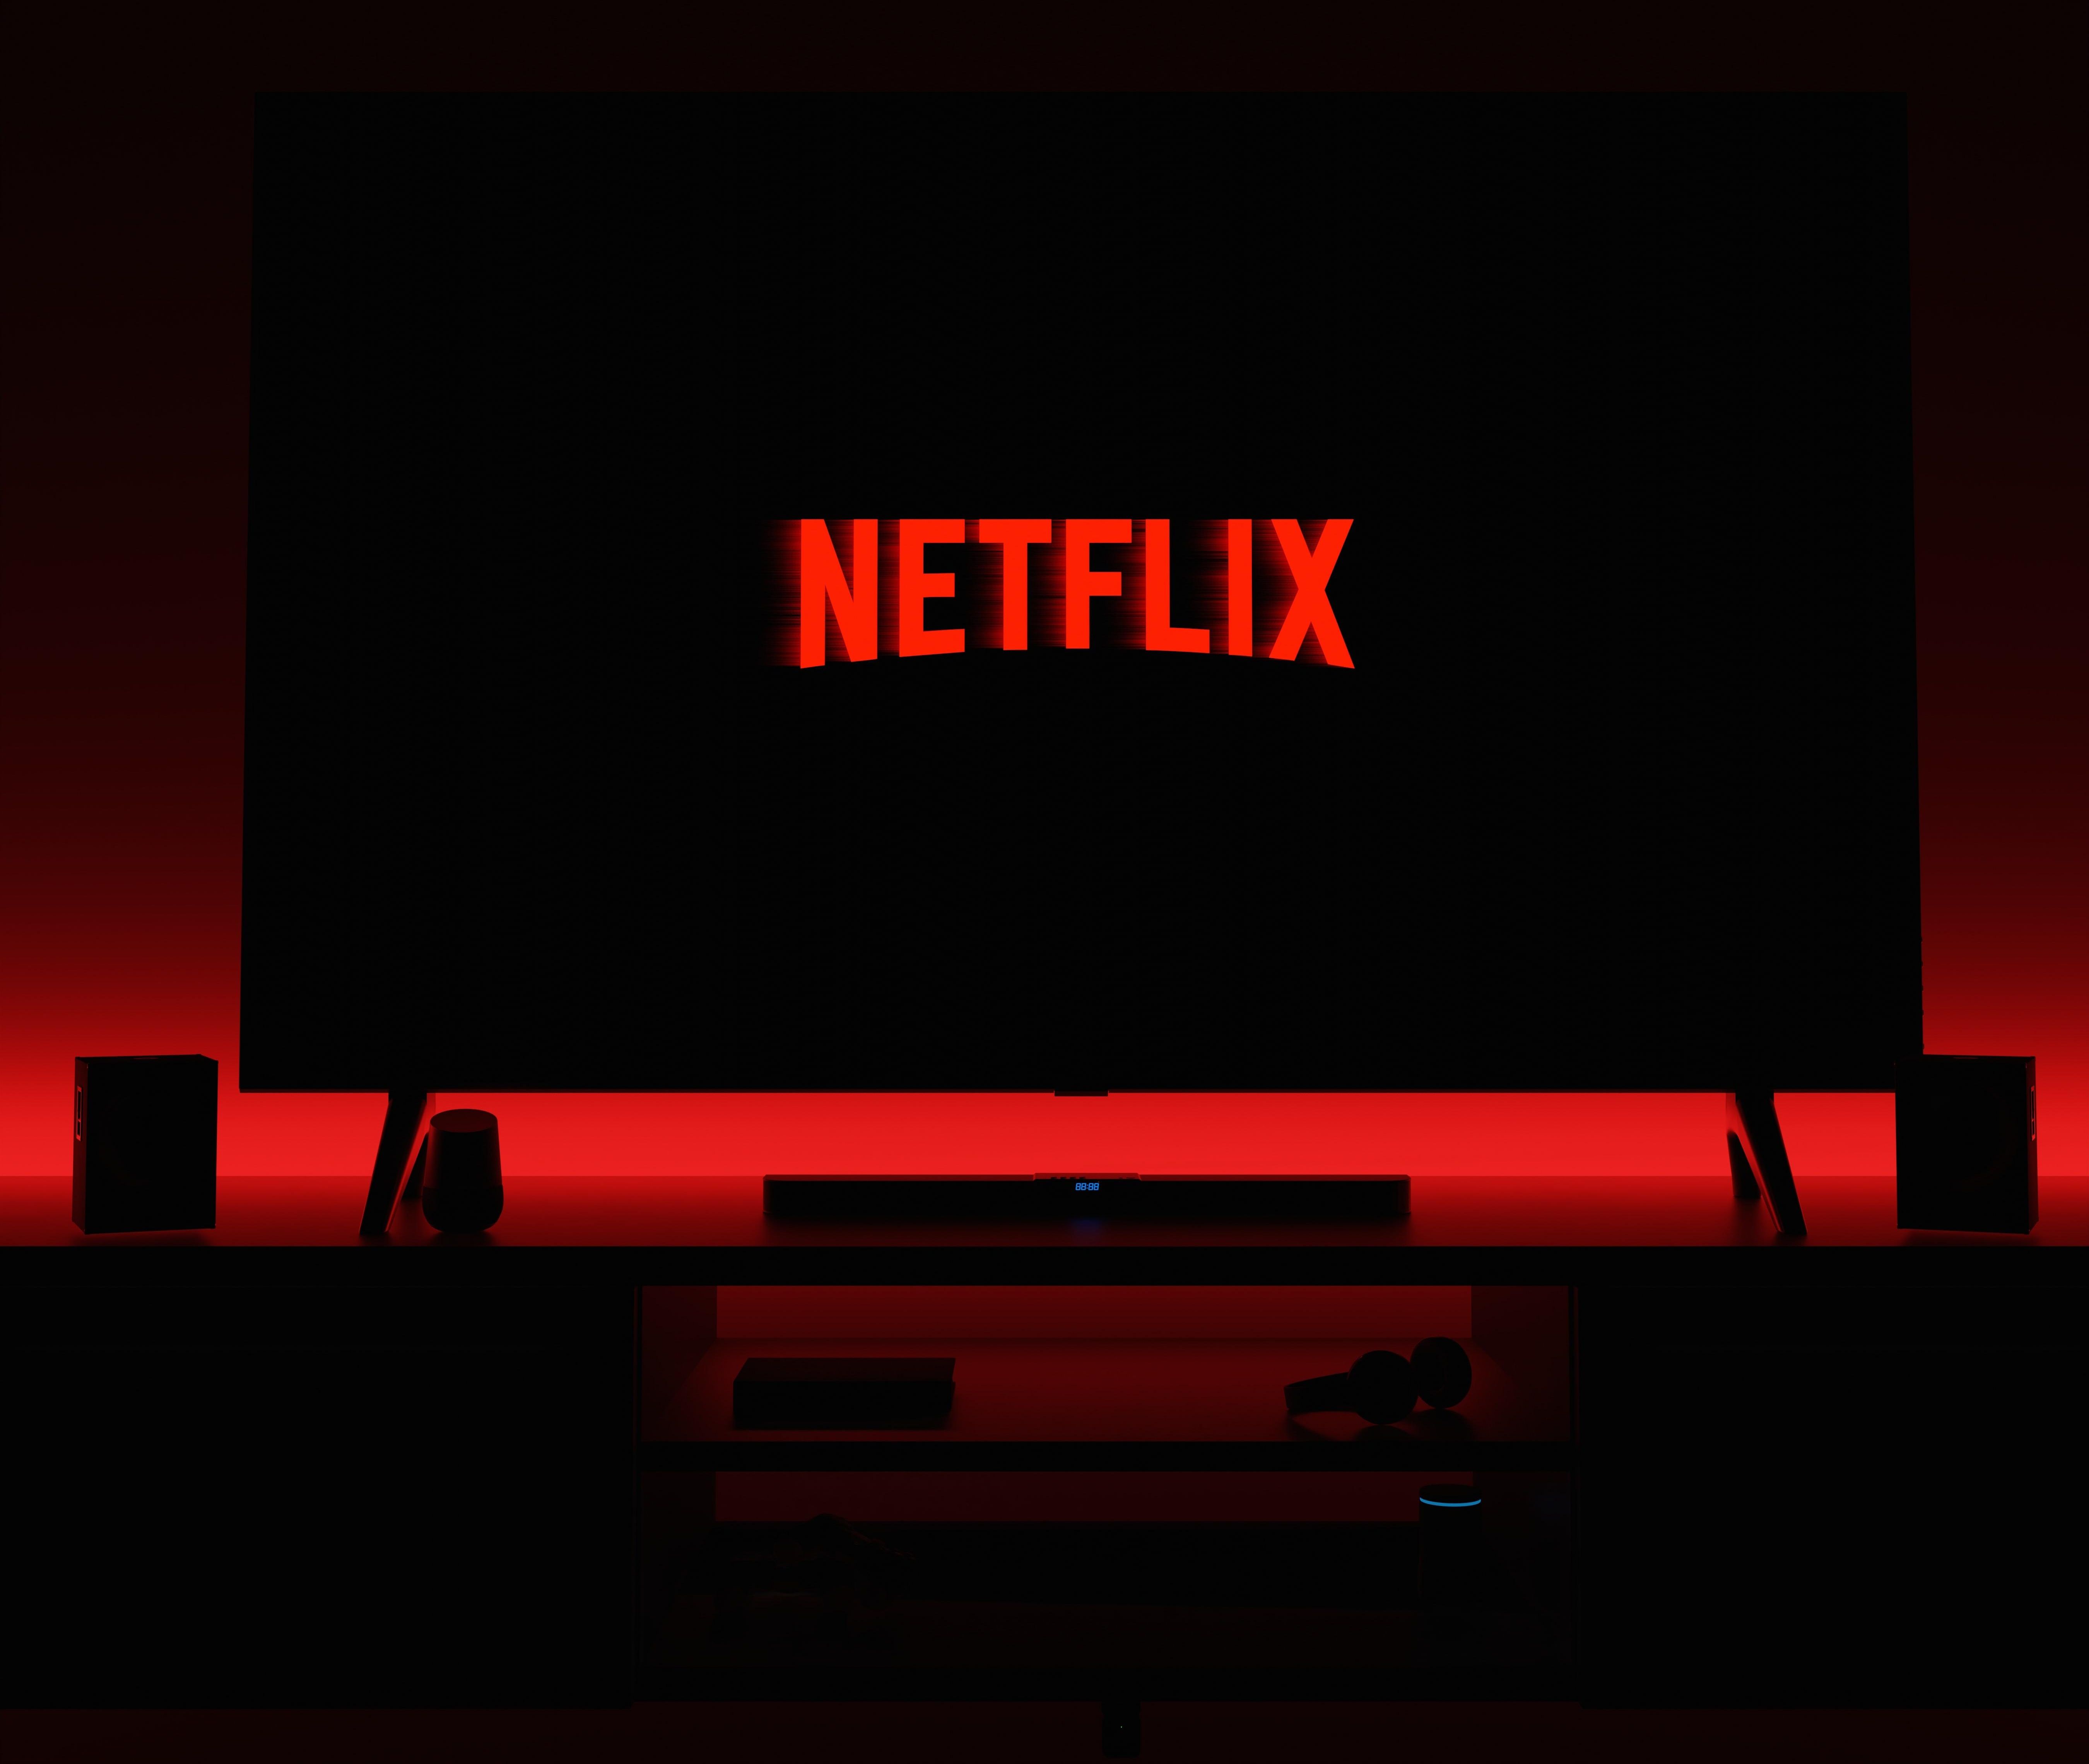 Netflix Facing Another Round of Layoffs: Report